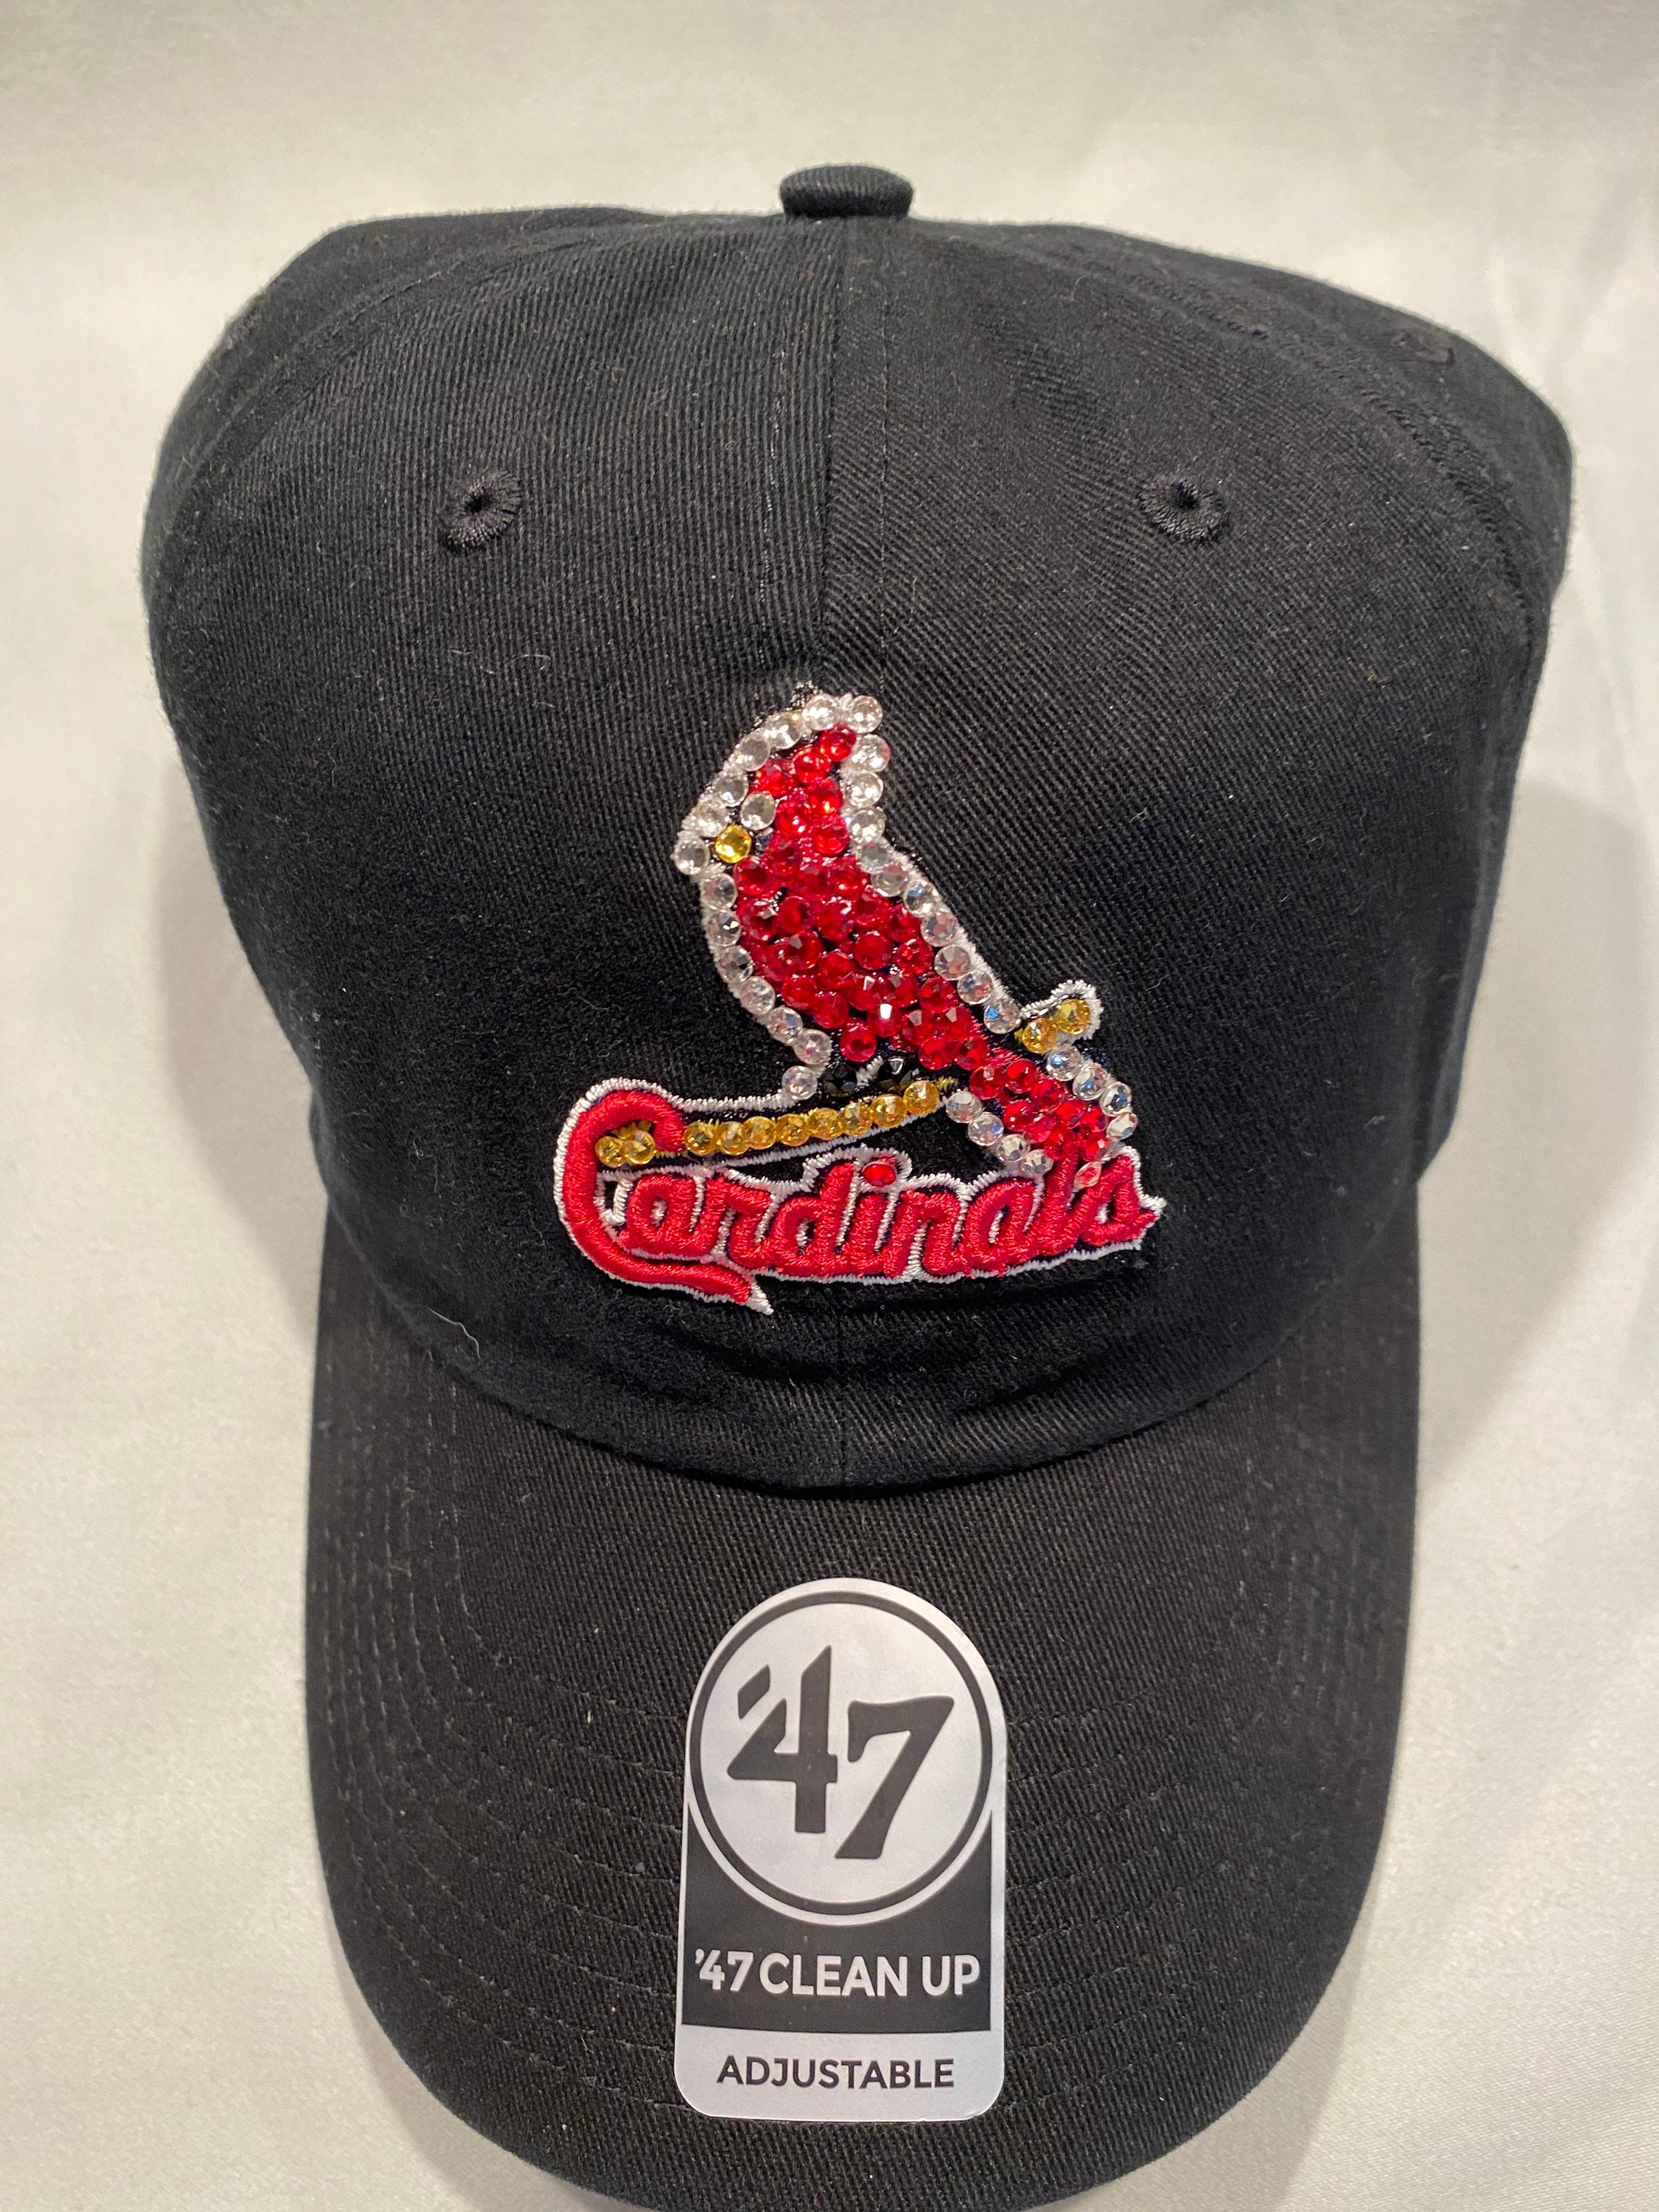 Blinged Black St Louis Cardinals Ladies Hat With Bird on a Bat 